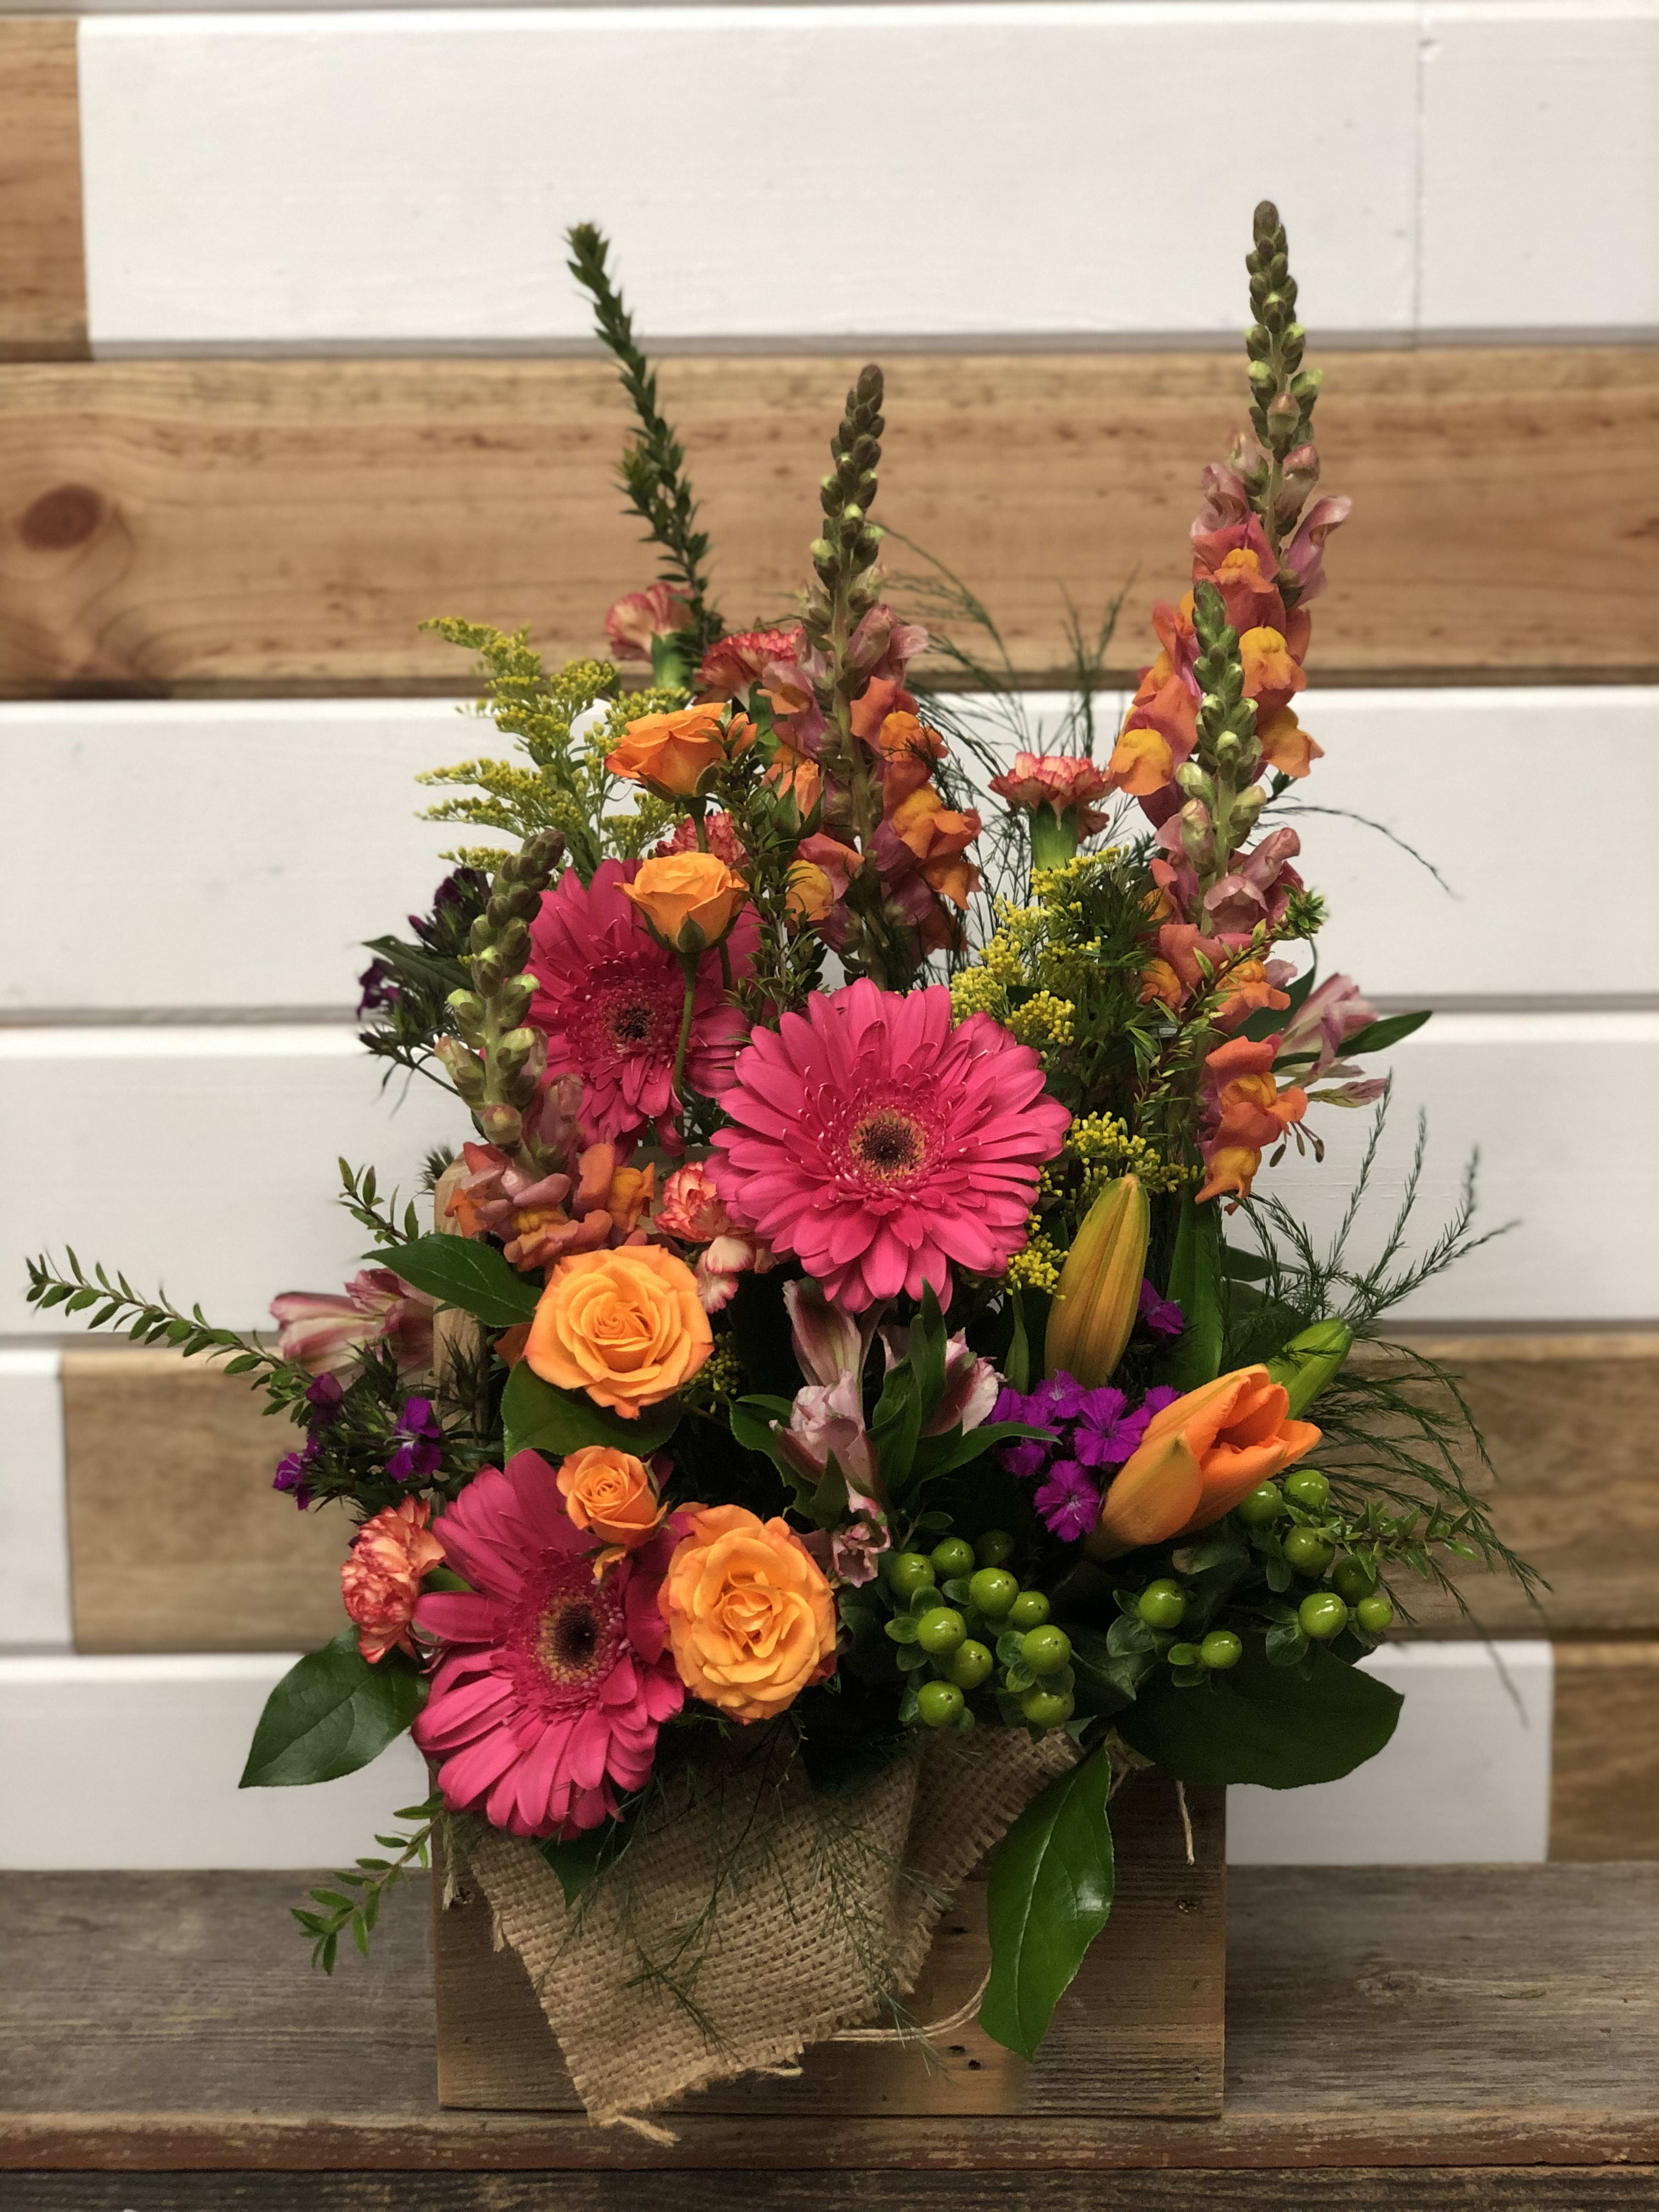 Rustic Bright Box - Fresh Gerbera Daisies, hypericum, spray roses and snapdragons fill this low wood box. This design is one of our favorite signature designs.  Also filling the box is mixed spring California flowers like lilies and dianthus.  Great for any occasion or just because!